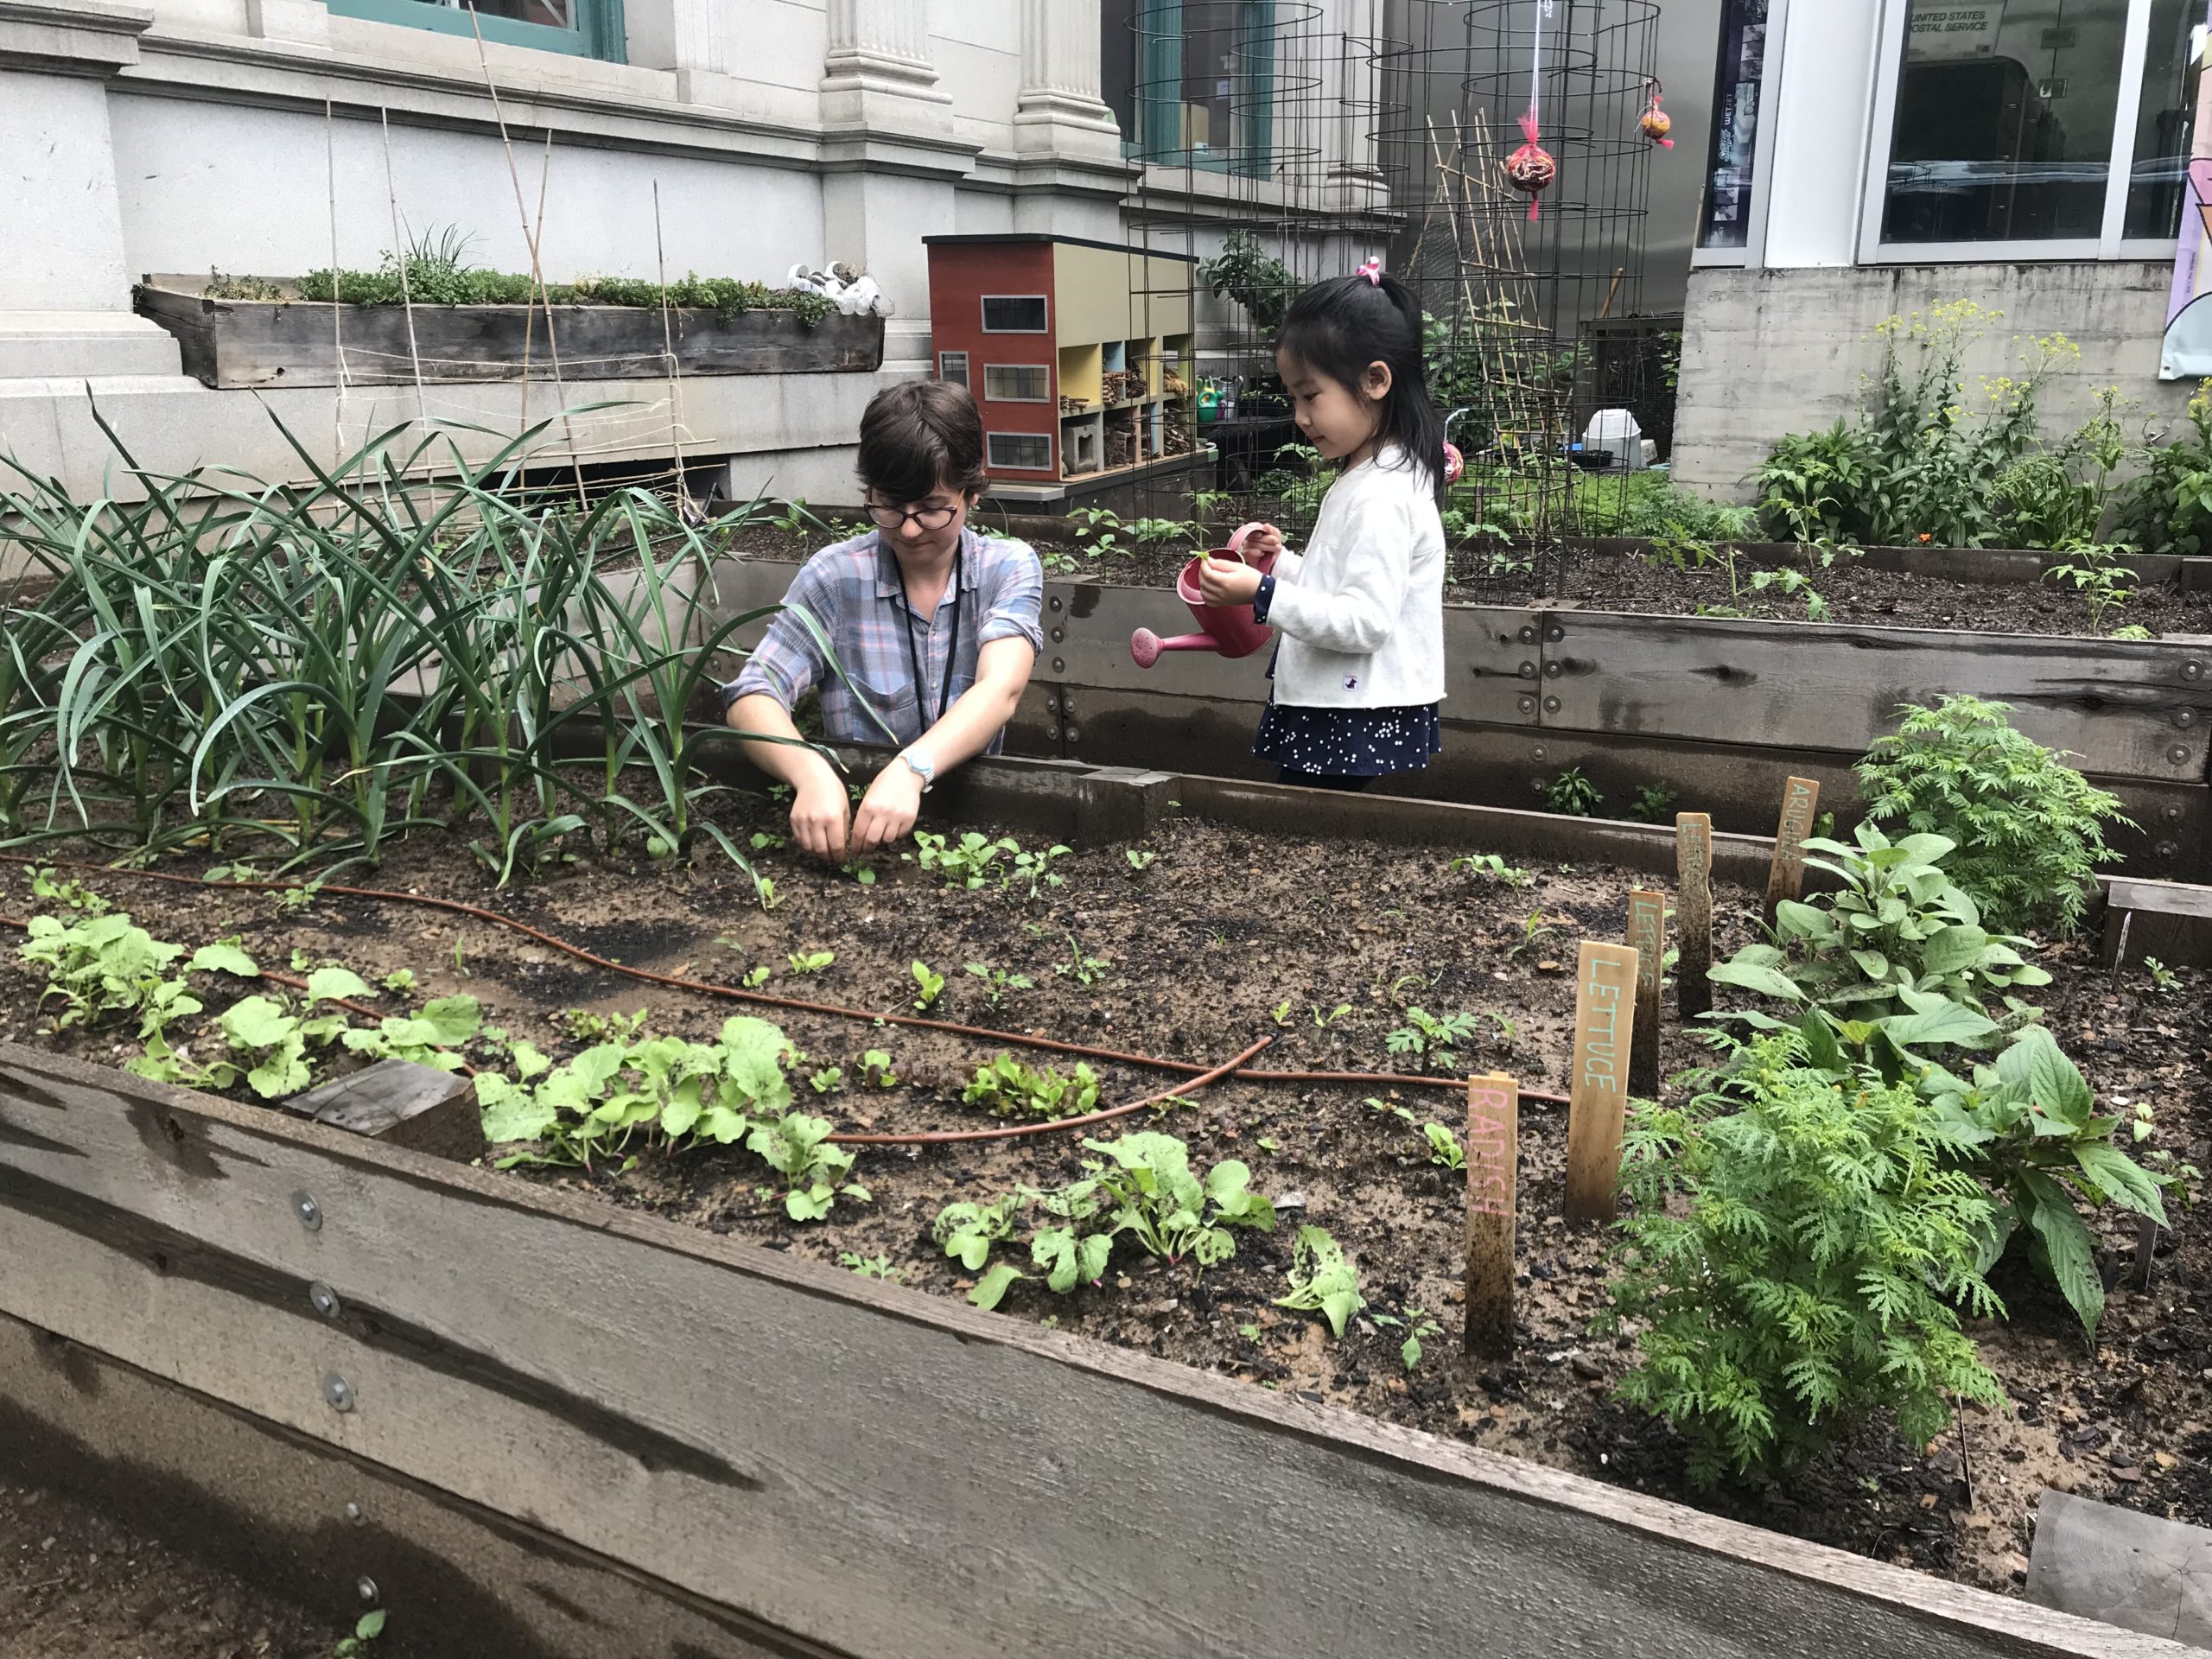 A child and a museum educator are outside in the garden space. The child is holding a small plant and a watering can. The educator has their hands in the garden soil.